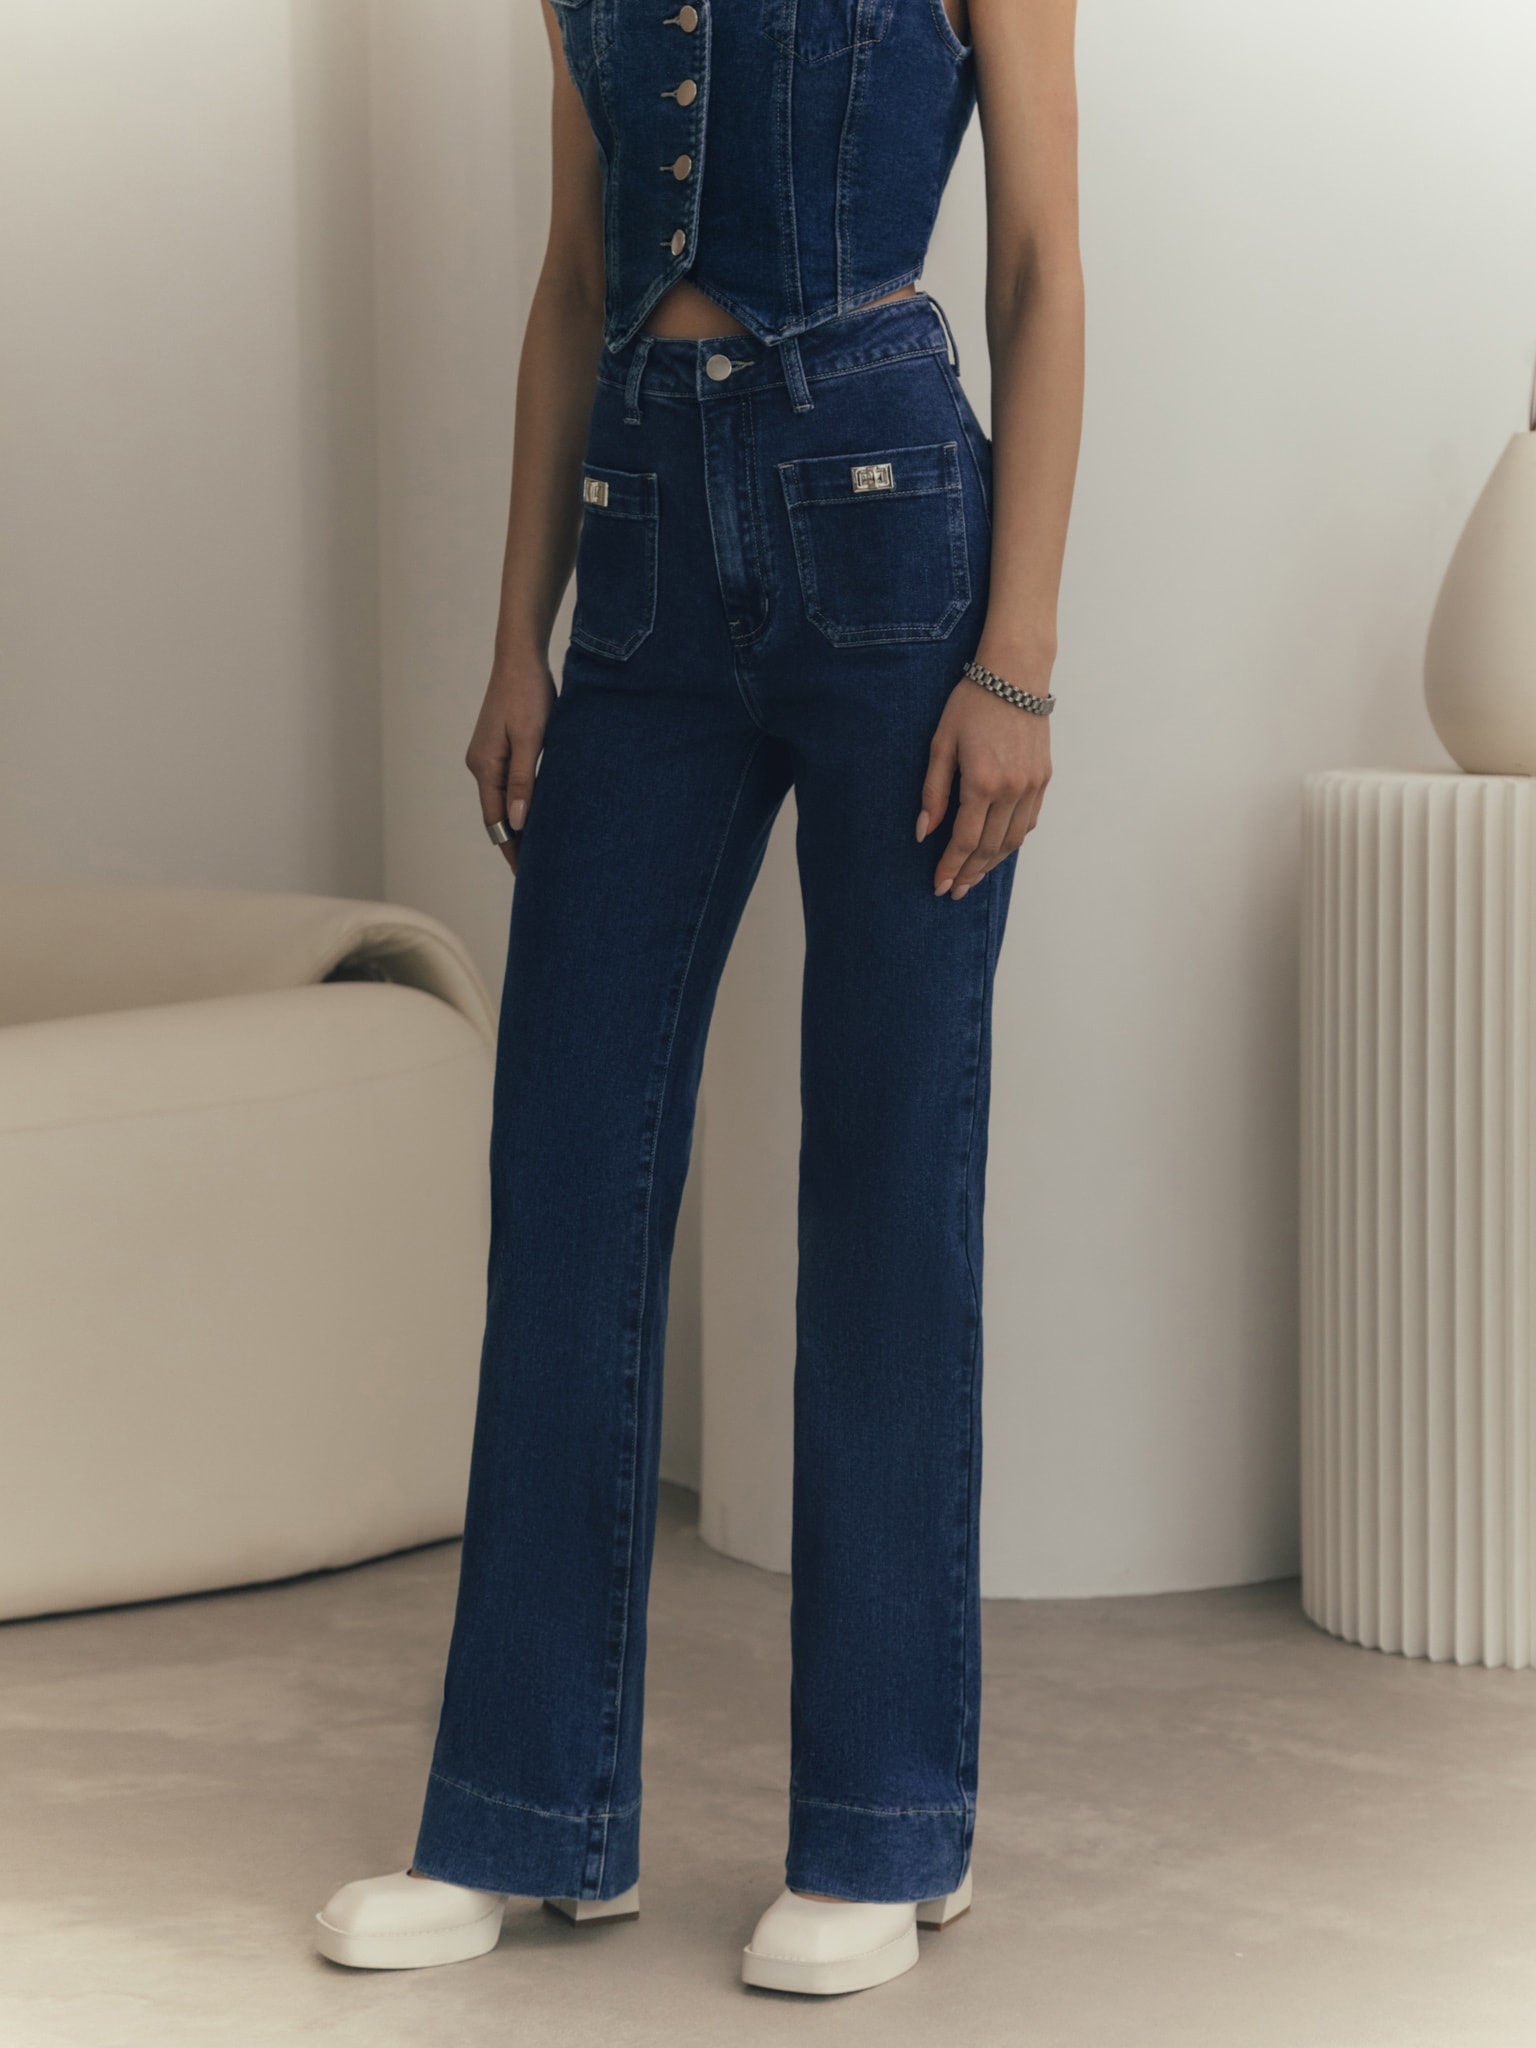 Outfit: off shoulder blouse, Levi's wedgie fit jeans and metal bauble  slippers - THE STYLING DUTCHMAN.